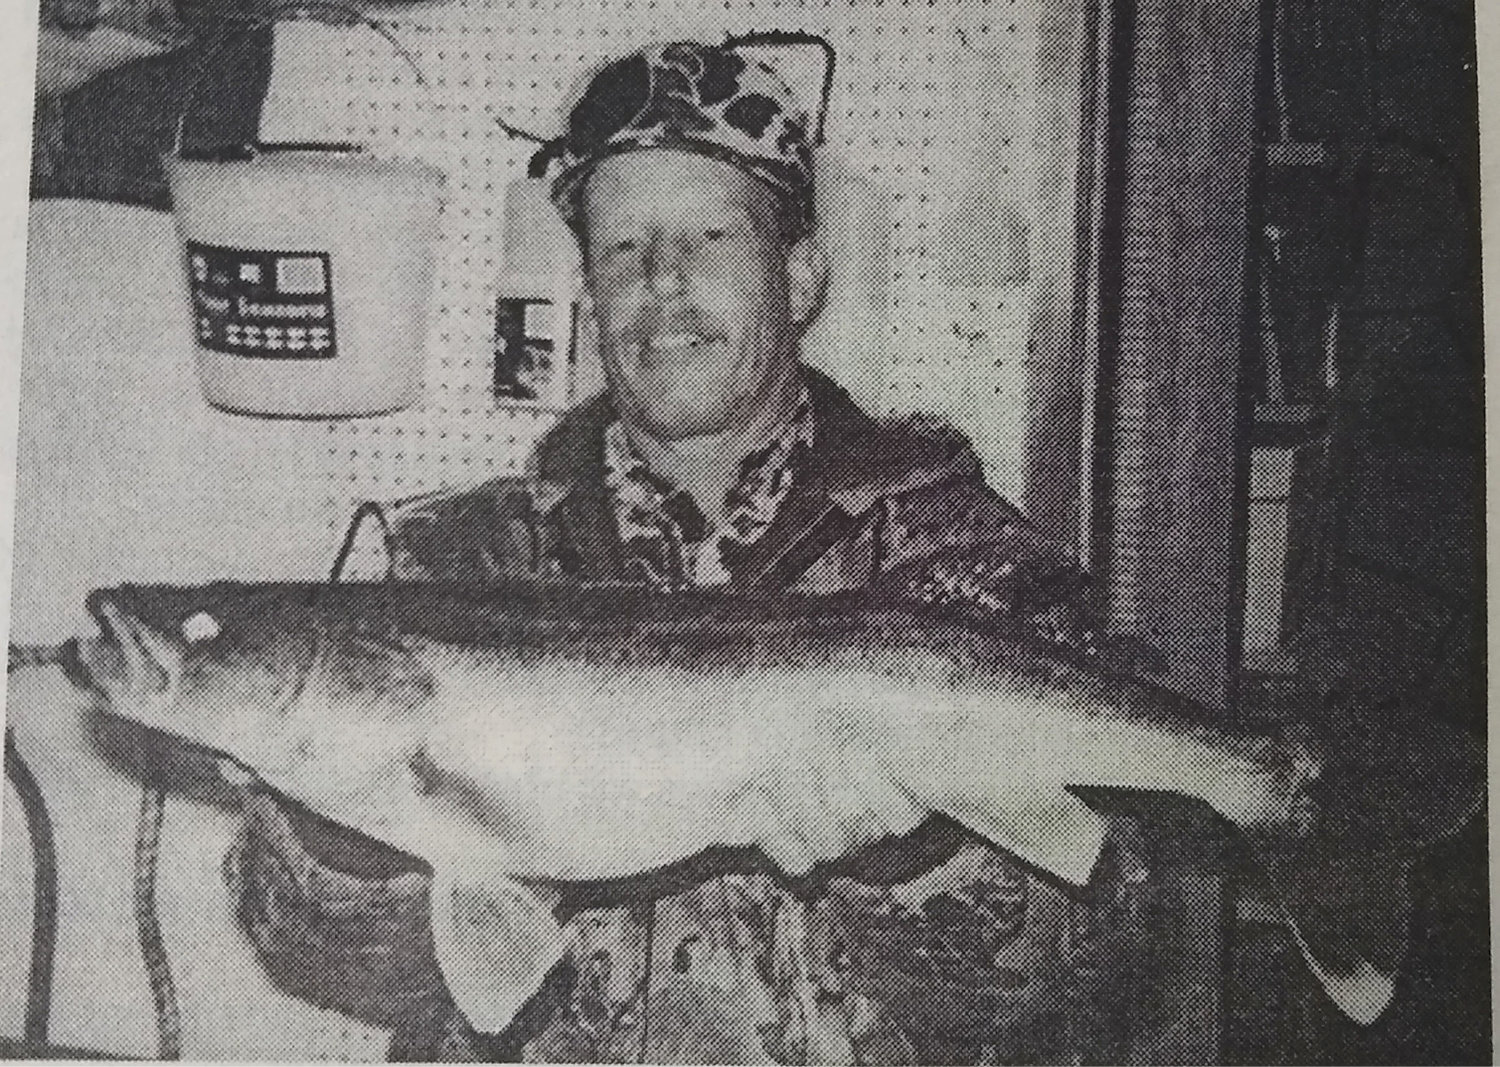 TWENTY-FIVE YEARS AGO: Craig Wehrkamp of Sioux Falls was one of many who enjoyed a recent week of good fishing. He caught a 9-pound, 6-ounce walleye measuring 28 ½ inches April 19 on Lake Thompson.